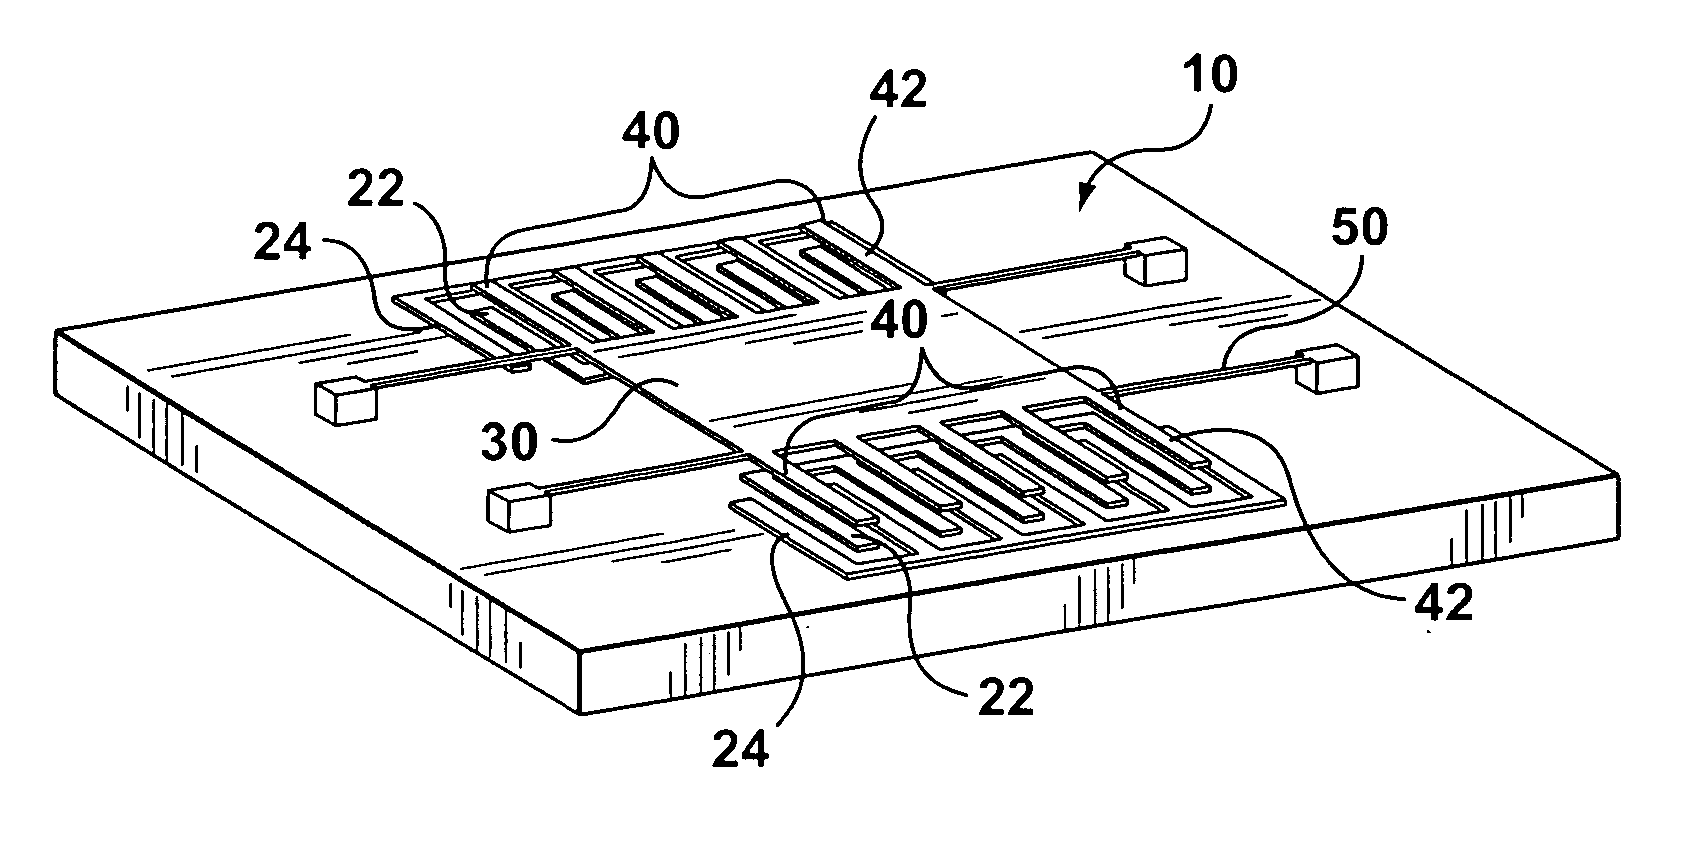 Bi-directional actuator utilizing both attractive and repulsive electrostatic forces